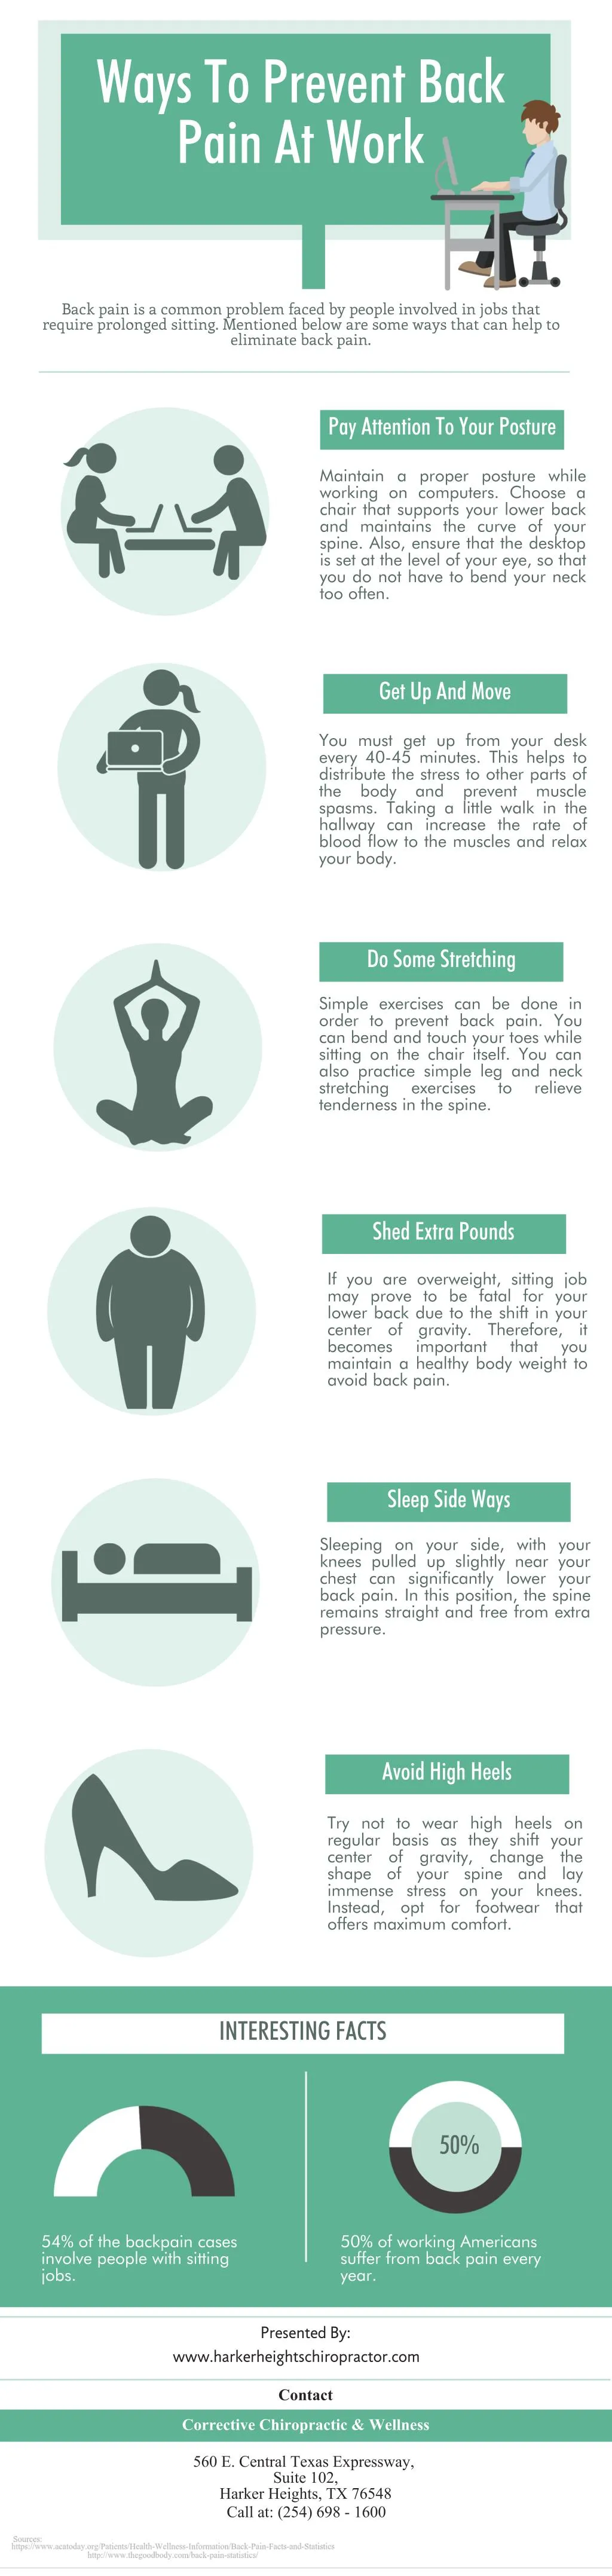 ways to prevent back pain at work